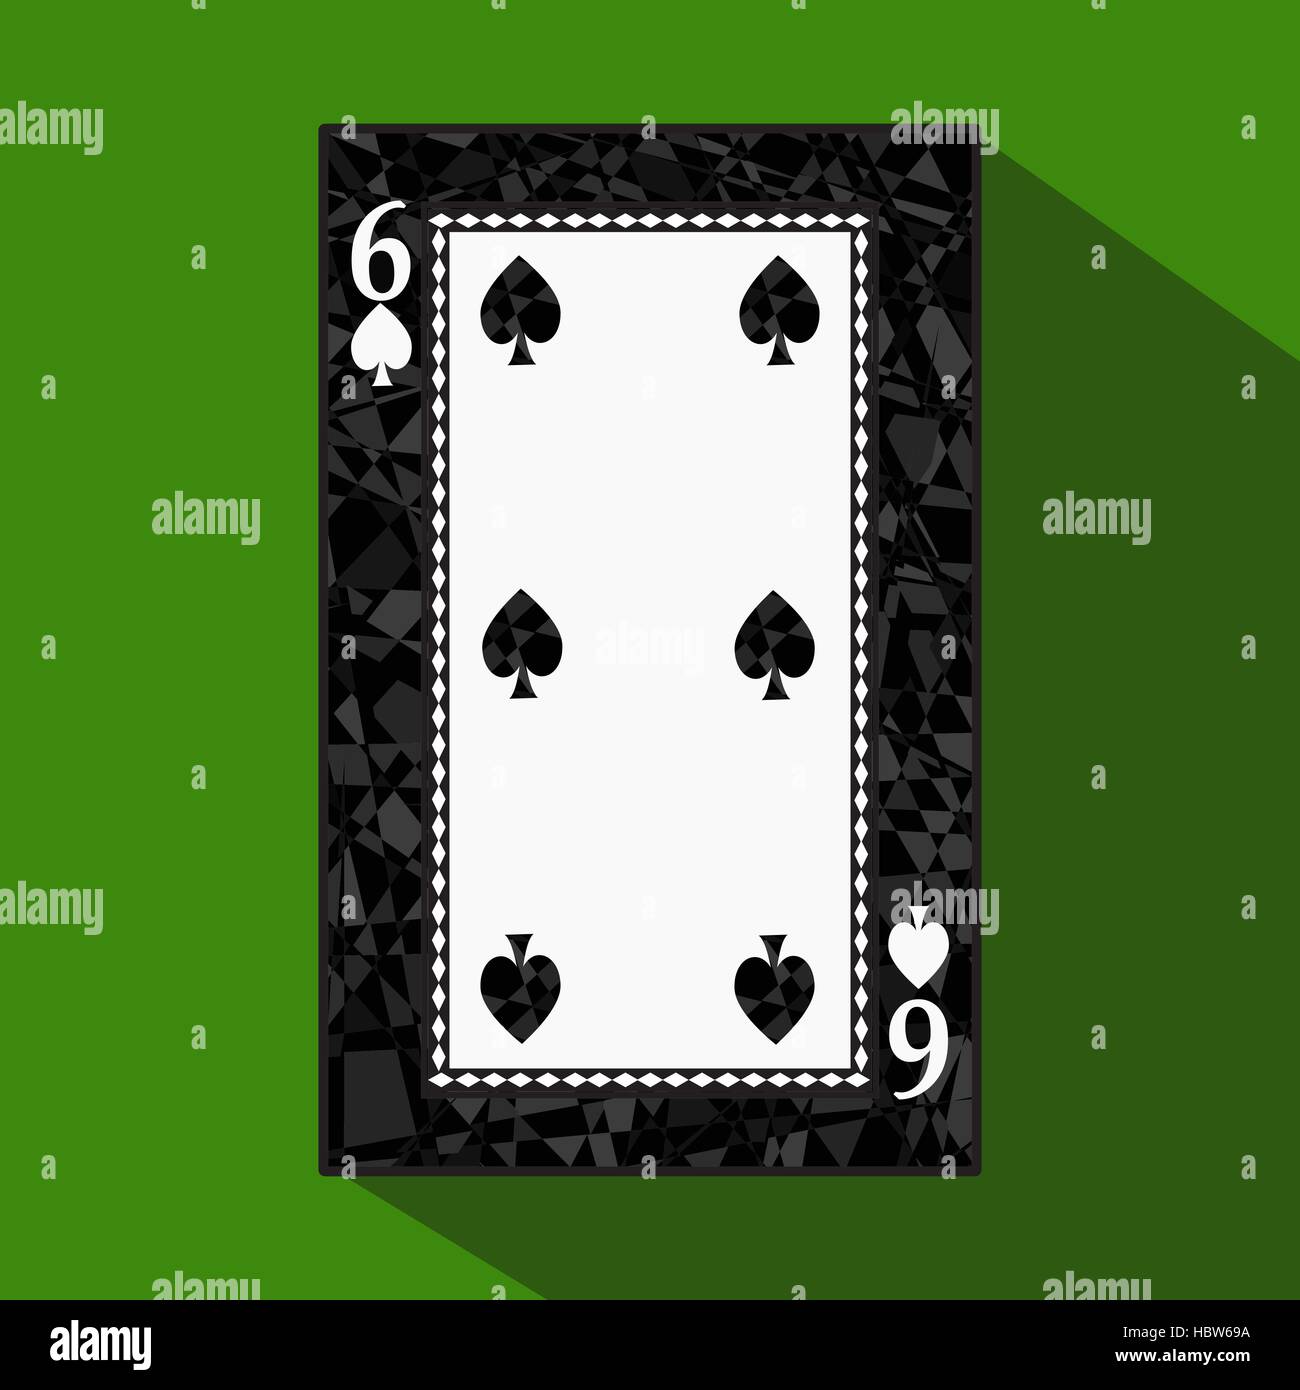 playing card. the icon picture is easy. peak spide 6 about dark region boundary. a vector illustration on a green background. application appointment  Stock Vector